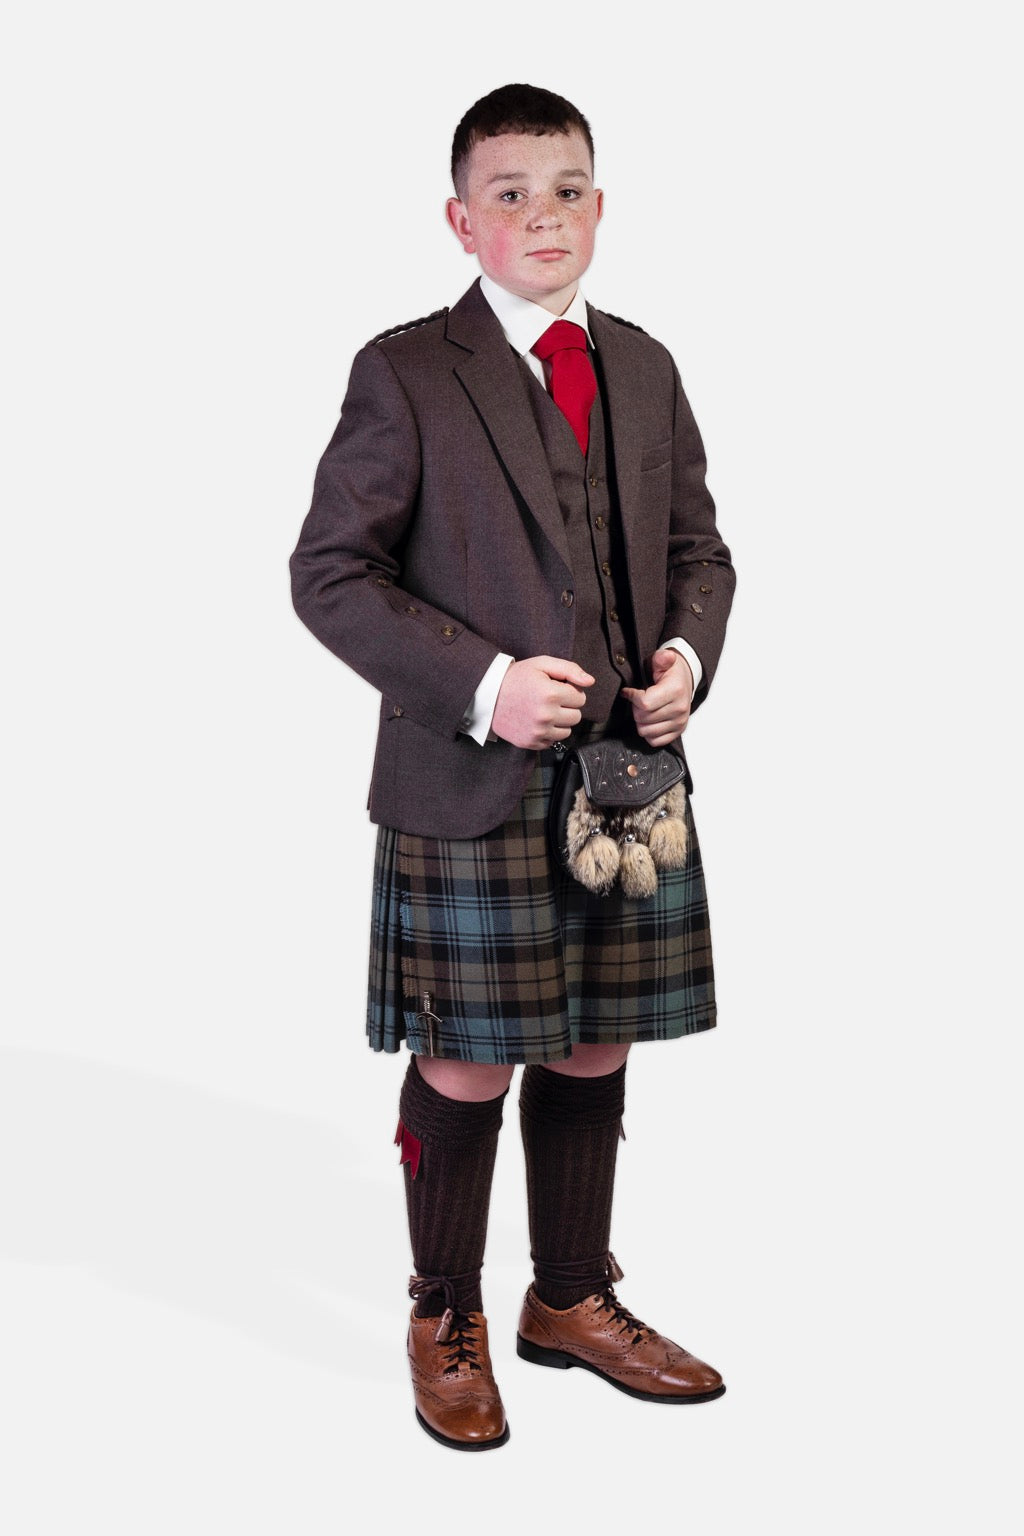 Children's Peat Holyrood Hire Outfit